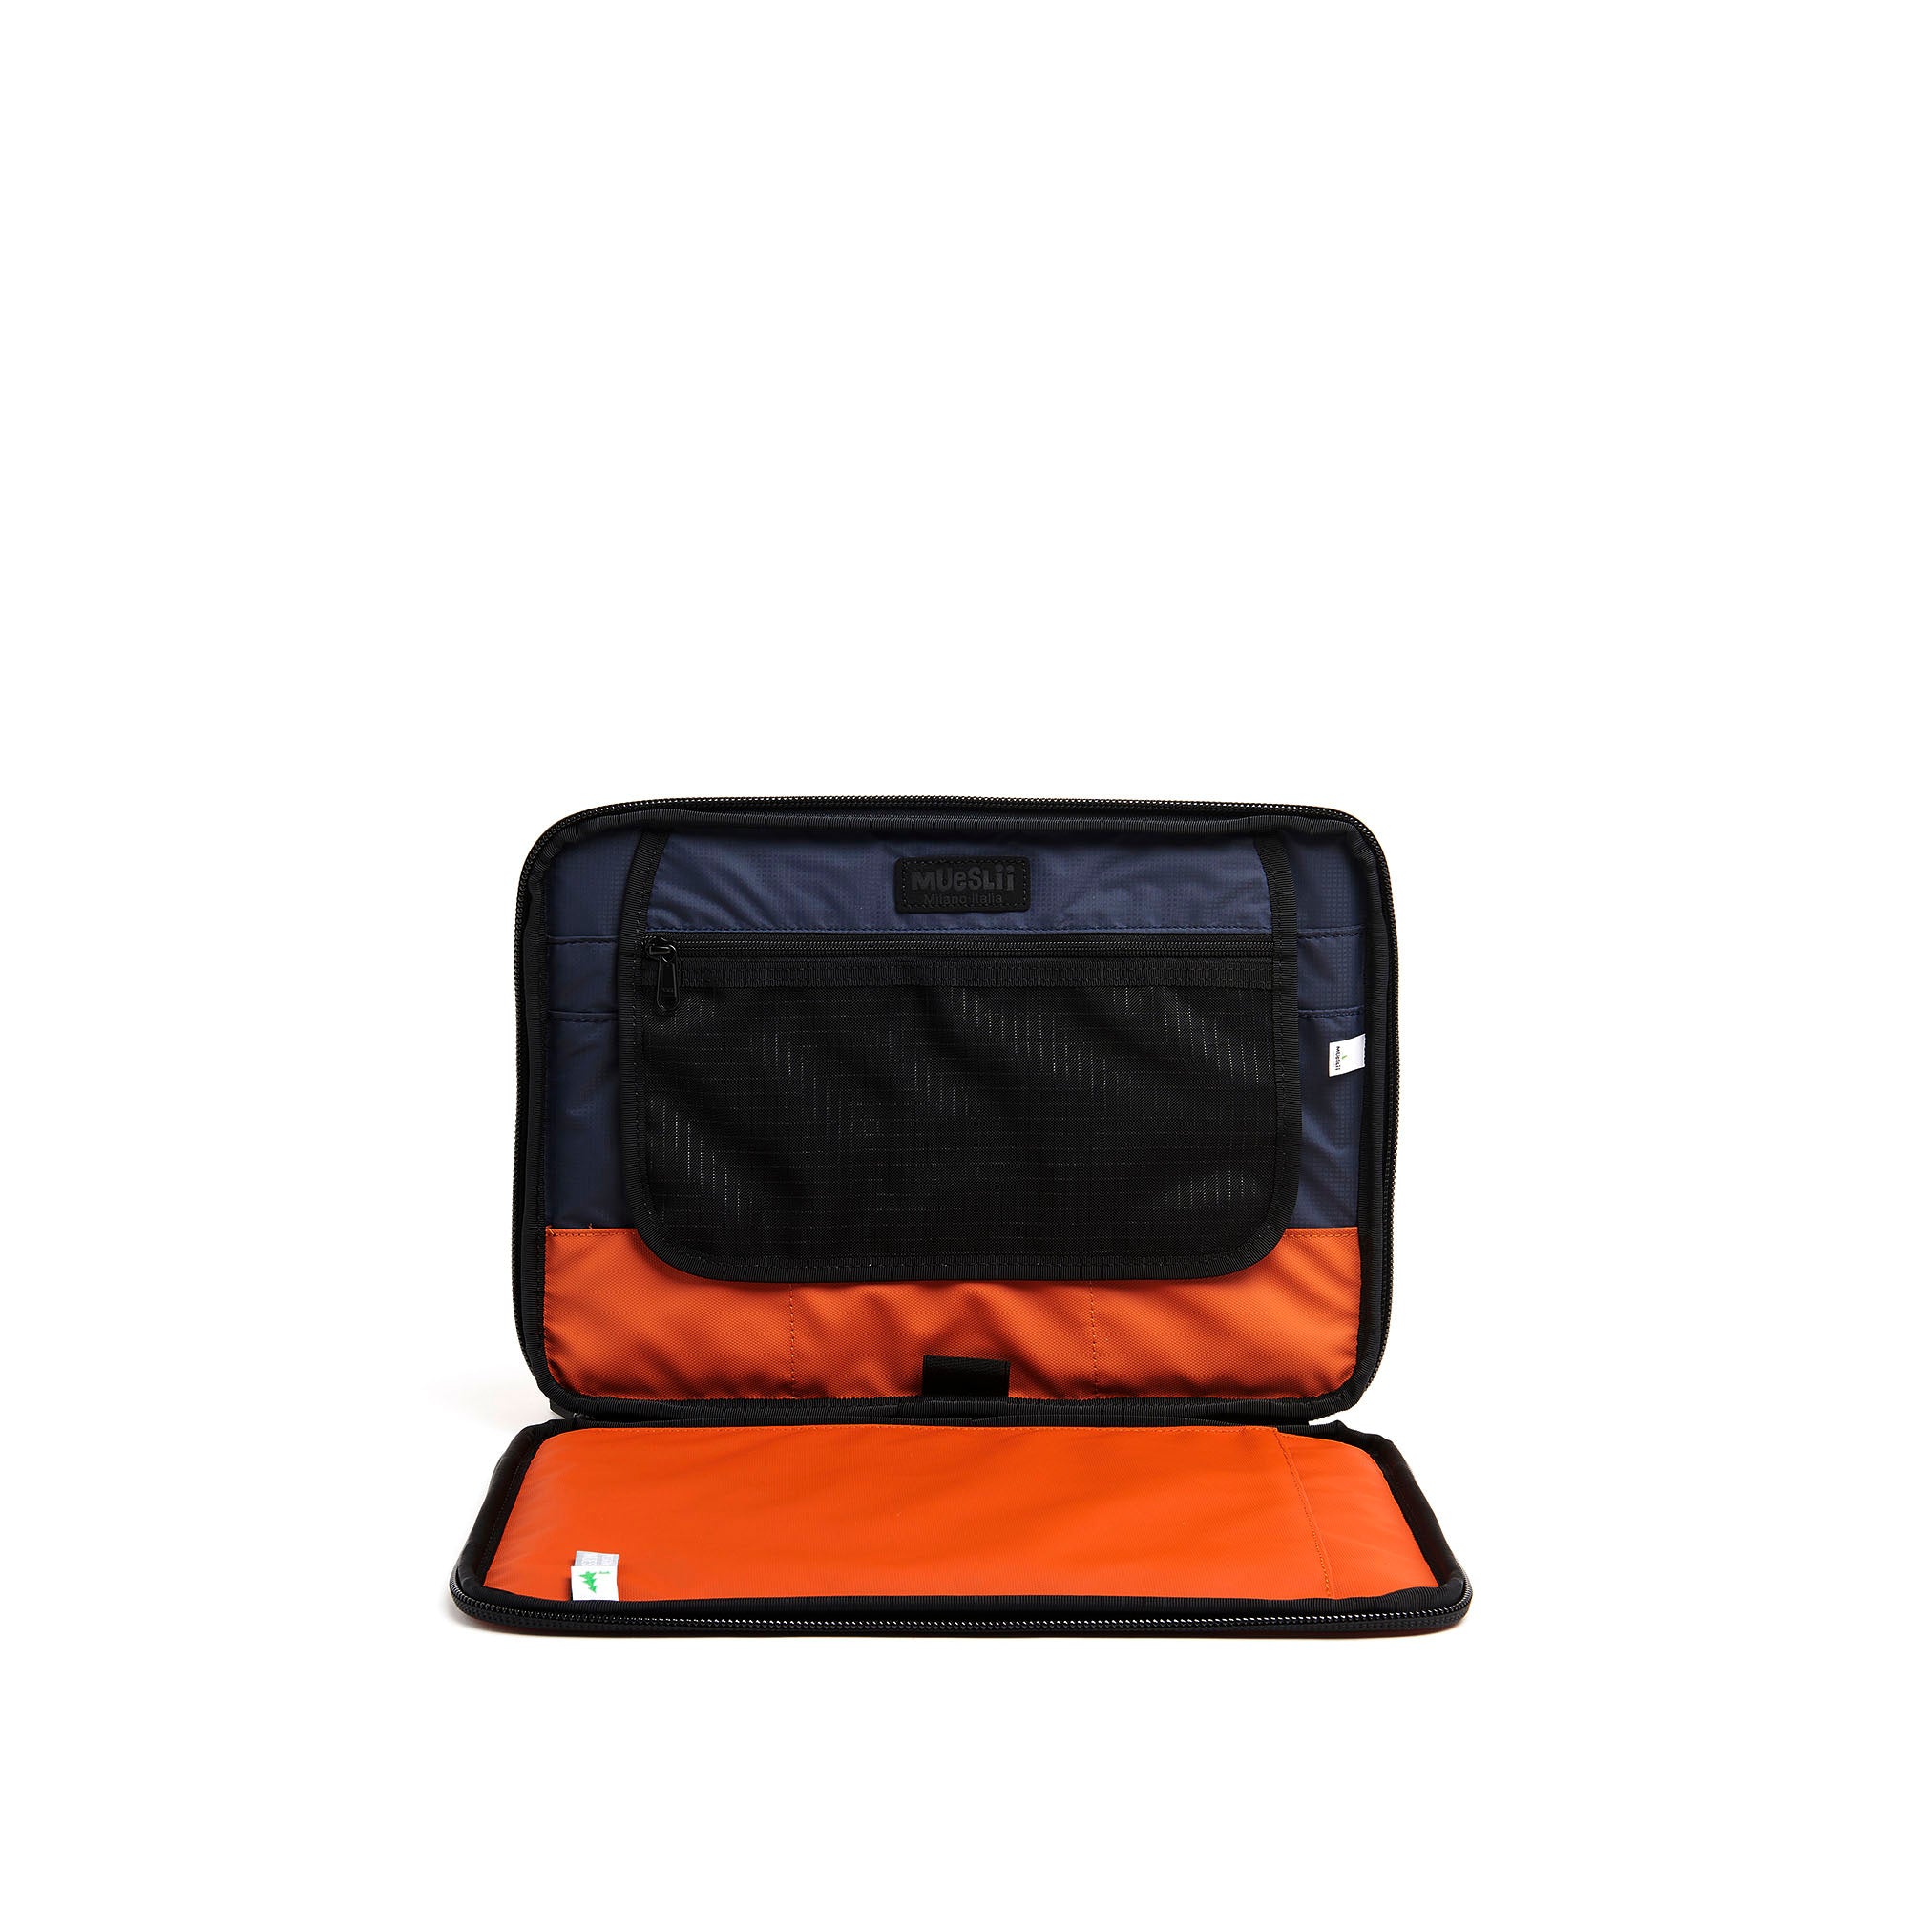 Mueslii A4 document- tech holder,  made of PU coated waterproof nylon, color orange, inside view.